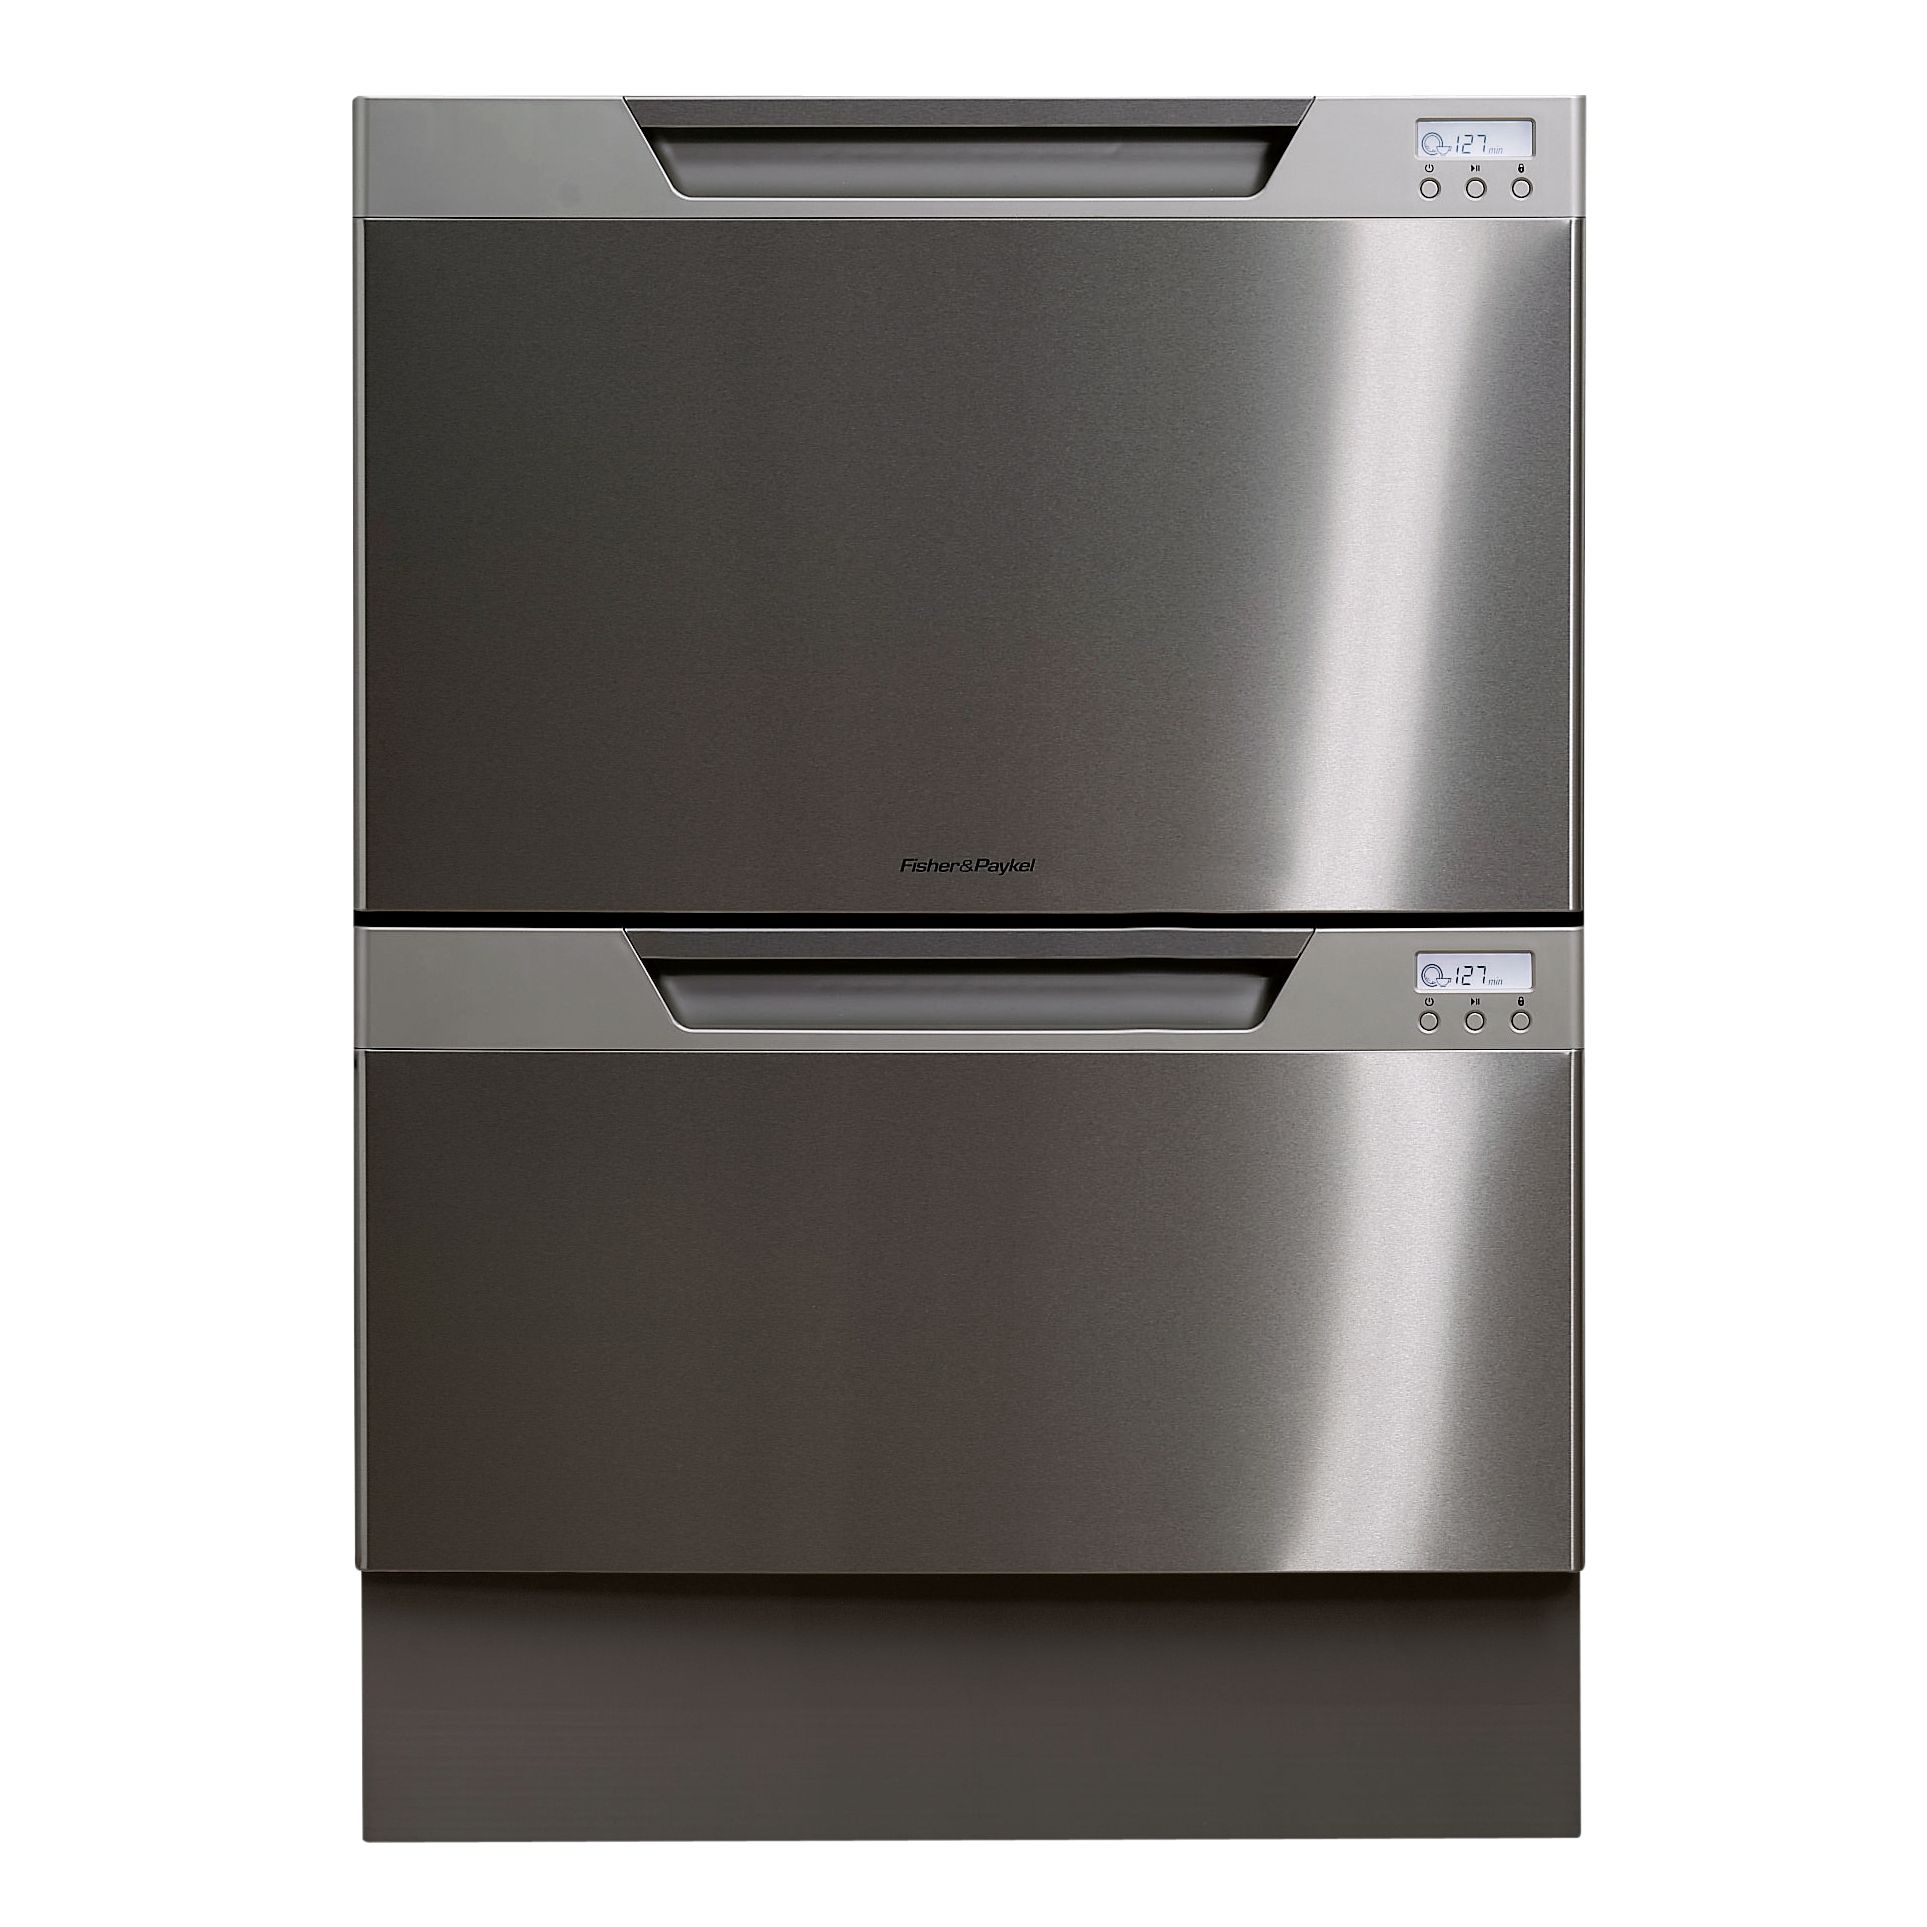 Fisher & Paykel DD60DCHX6 Built-in Dishwasher, Stainless Steel at John Lewis